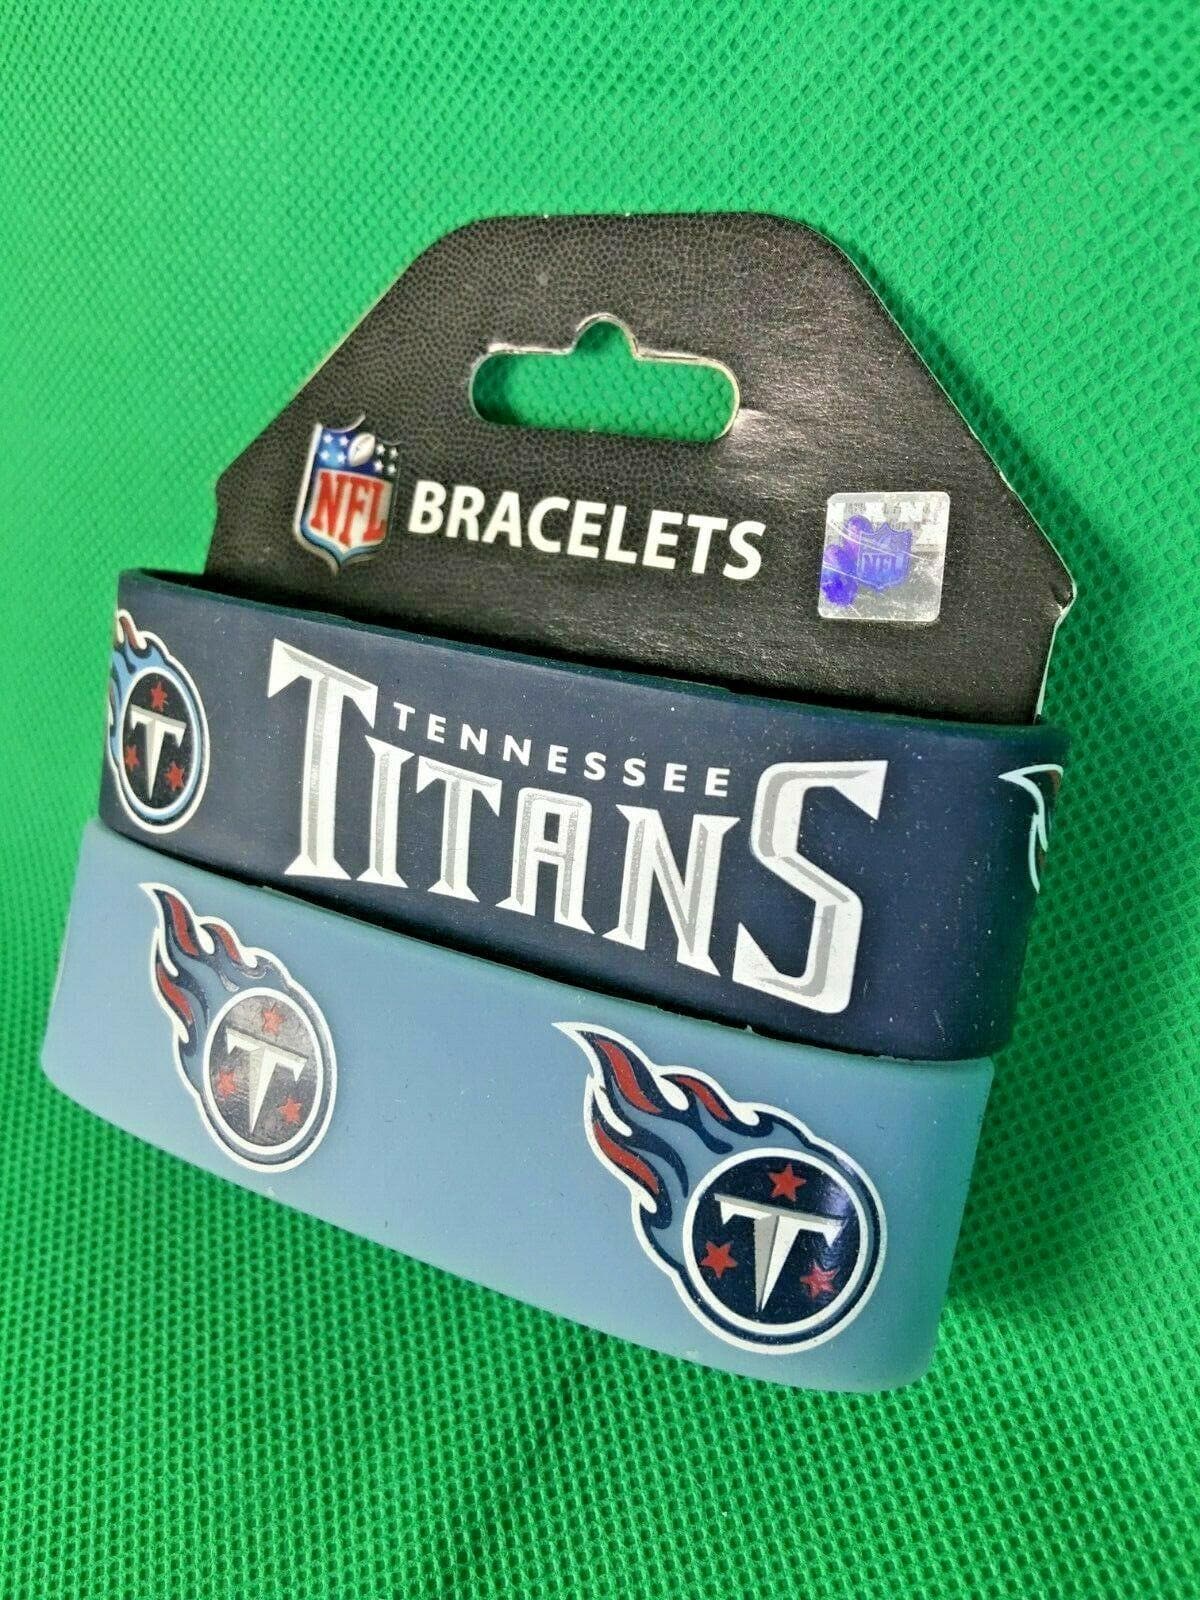 NFL Tennessee Titans Rubber Bracelets/Wristbands NWT